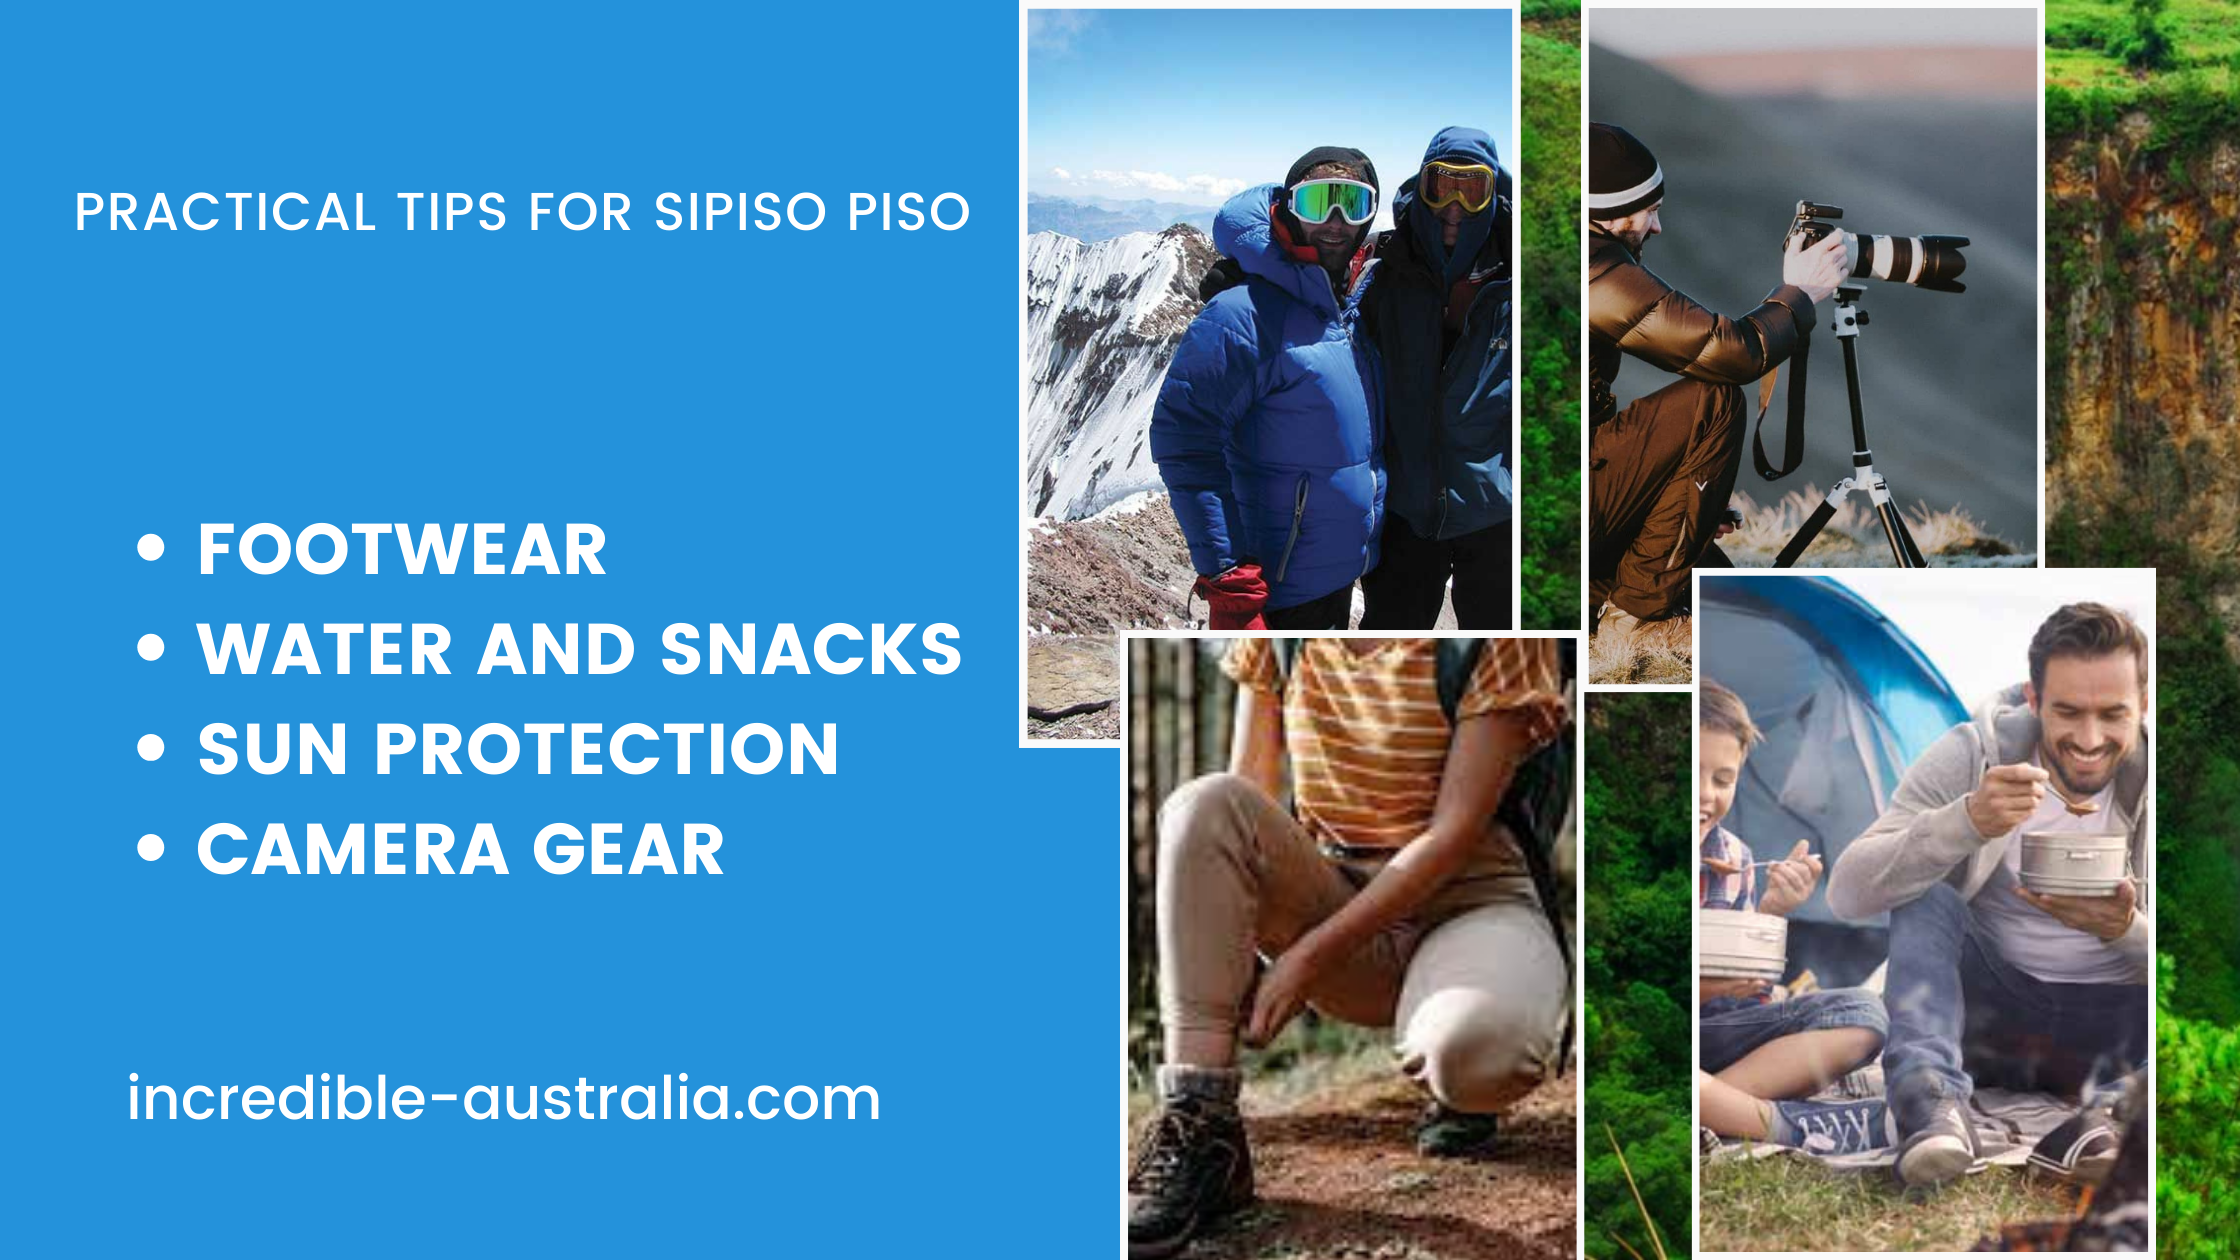 Practical Tips for Sipiso Piso Waterfall Hike